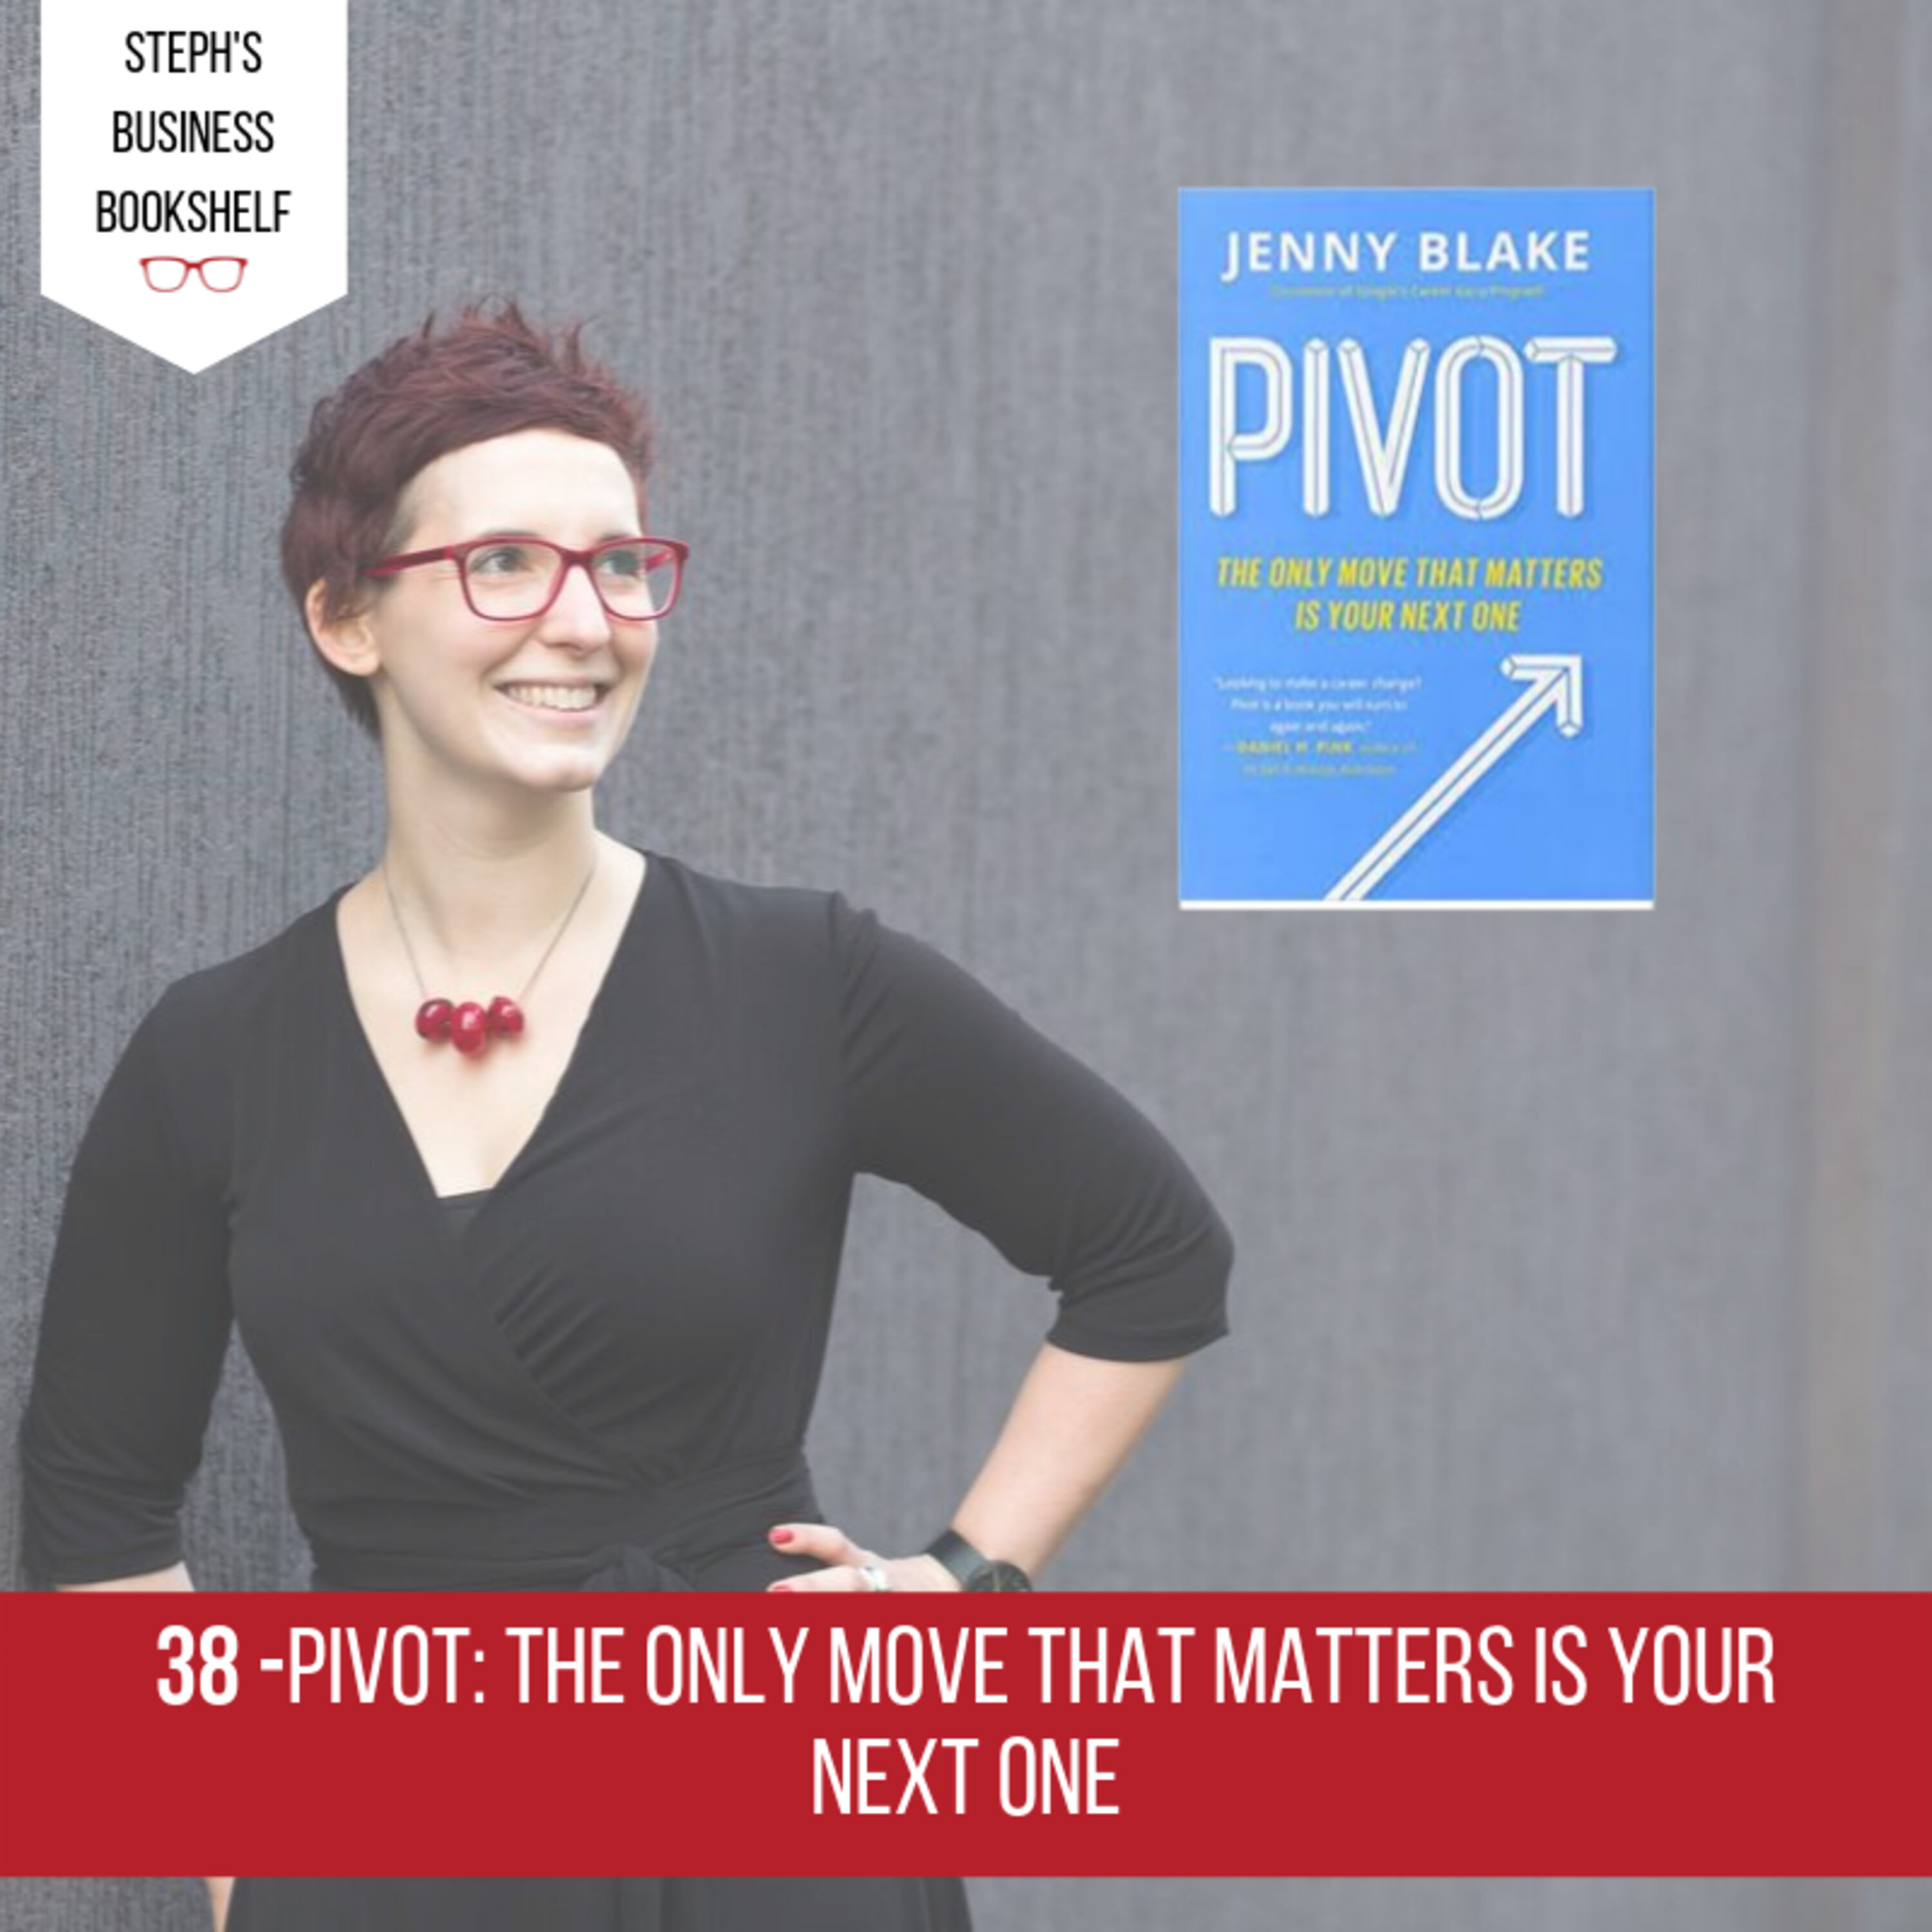 Pivot by Jenny Blake: The only move that matters is your next one Image